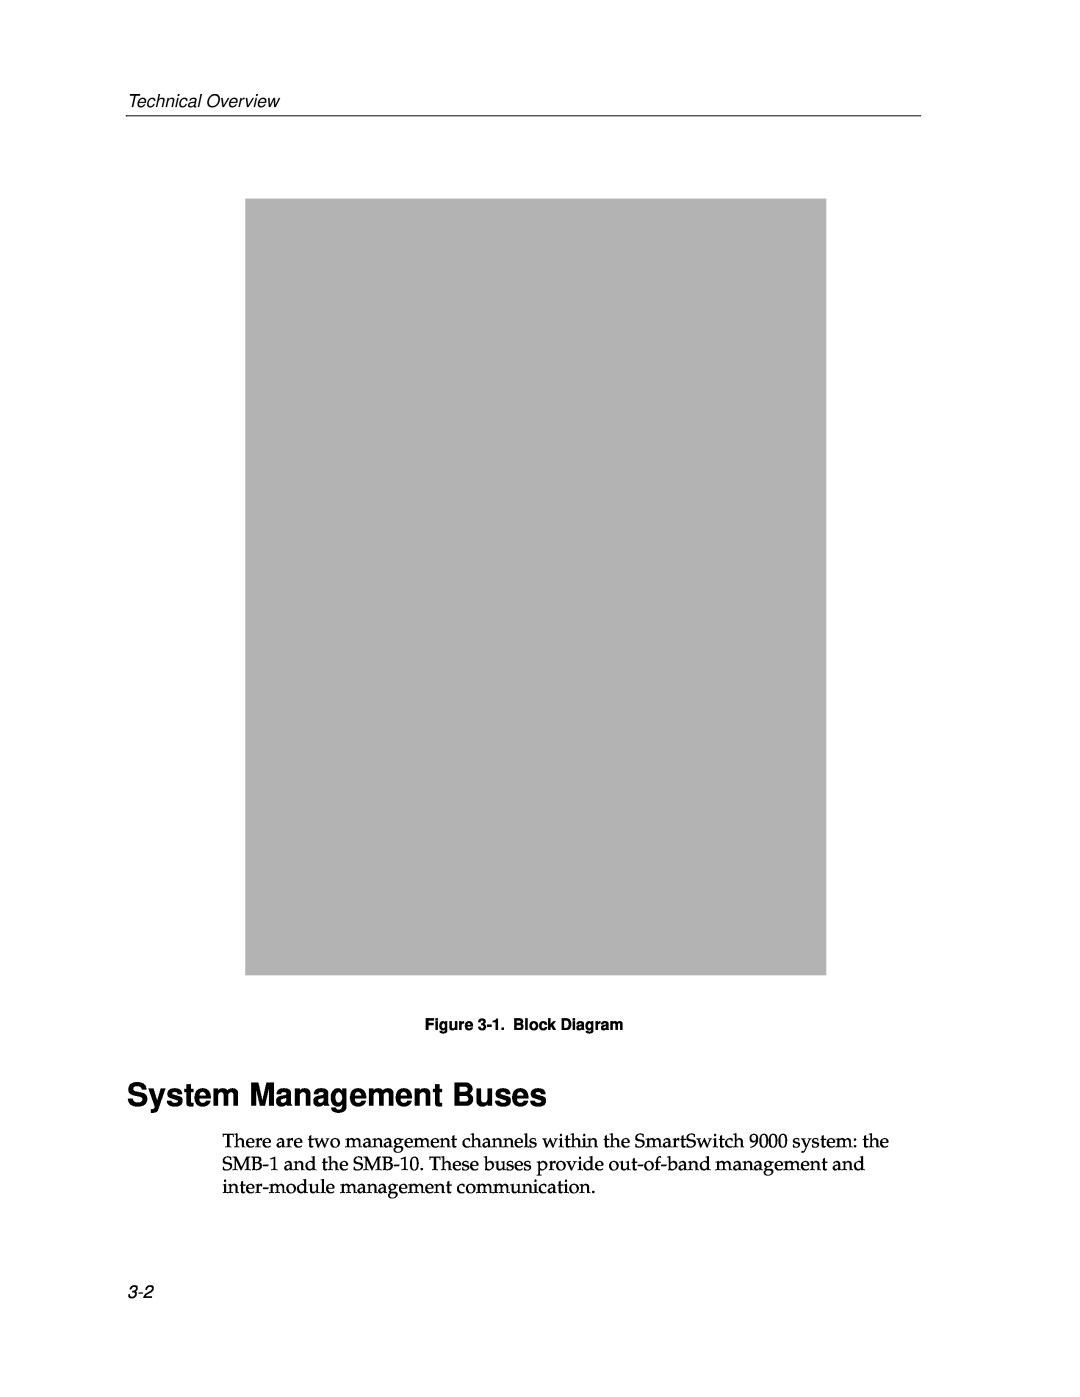 Cabletron Systems 9F122-12, 9F120-08, 9F125-0 manual System Management Buses, Technical Overview, 1. Block Diagram 